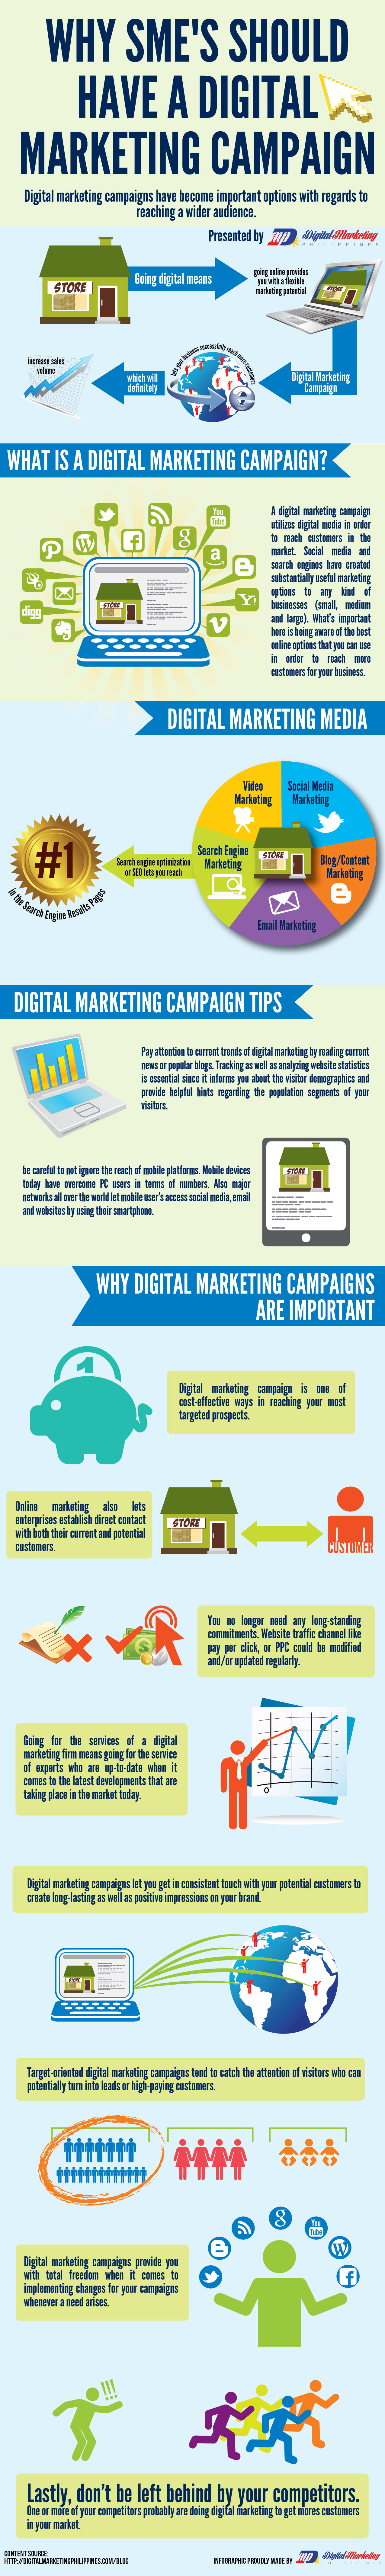 Why SME's Should Have A Digital Marketing Campaign? Infographic